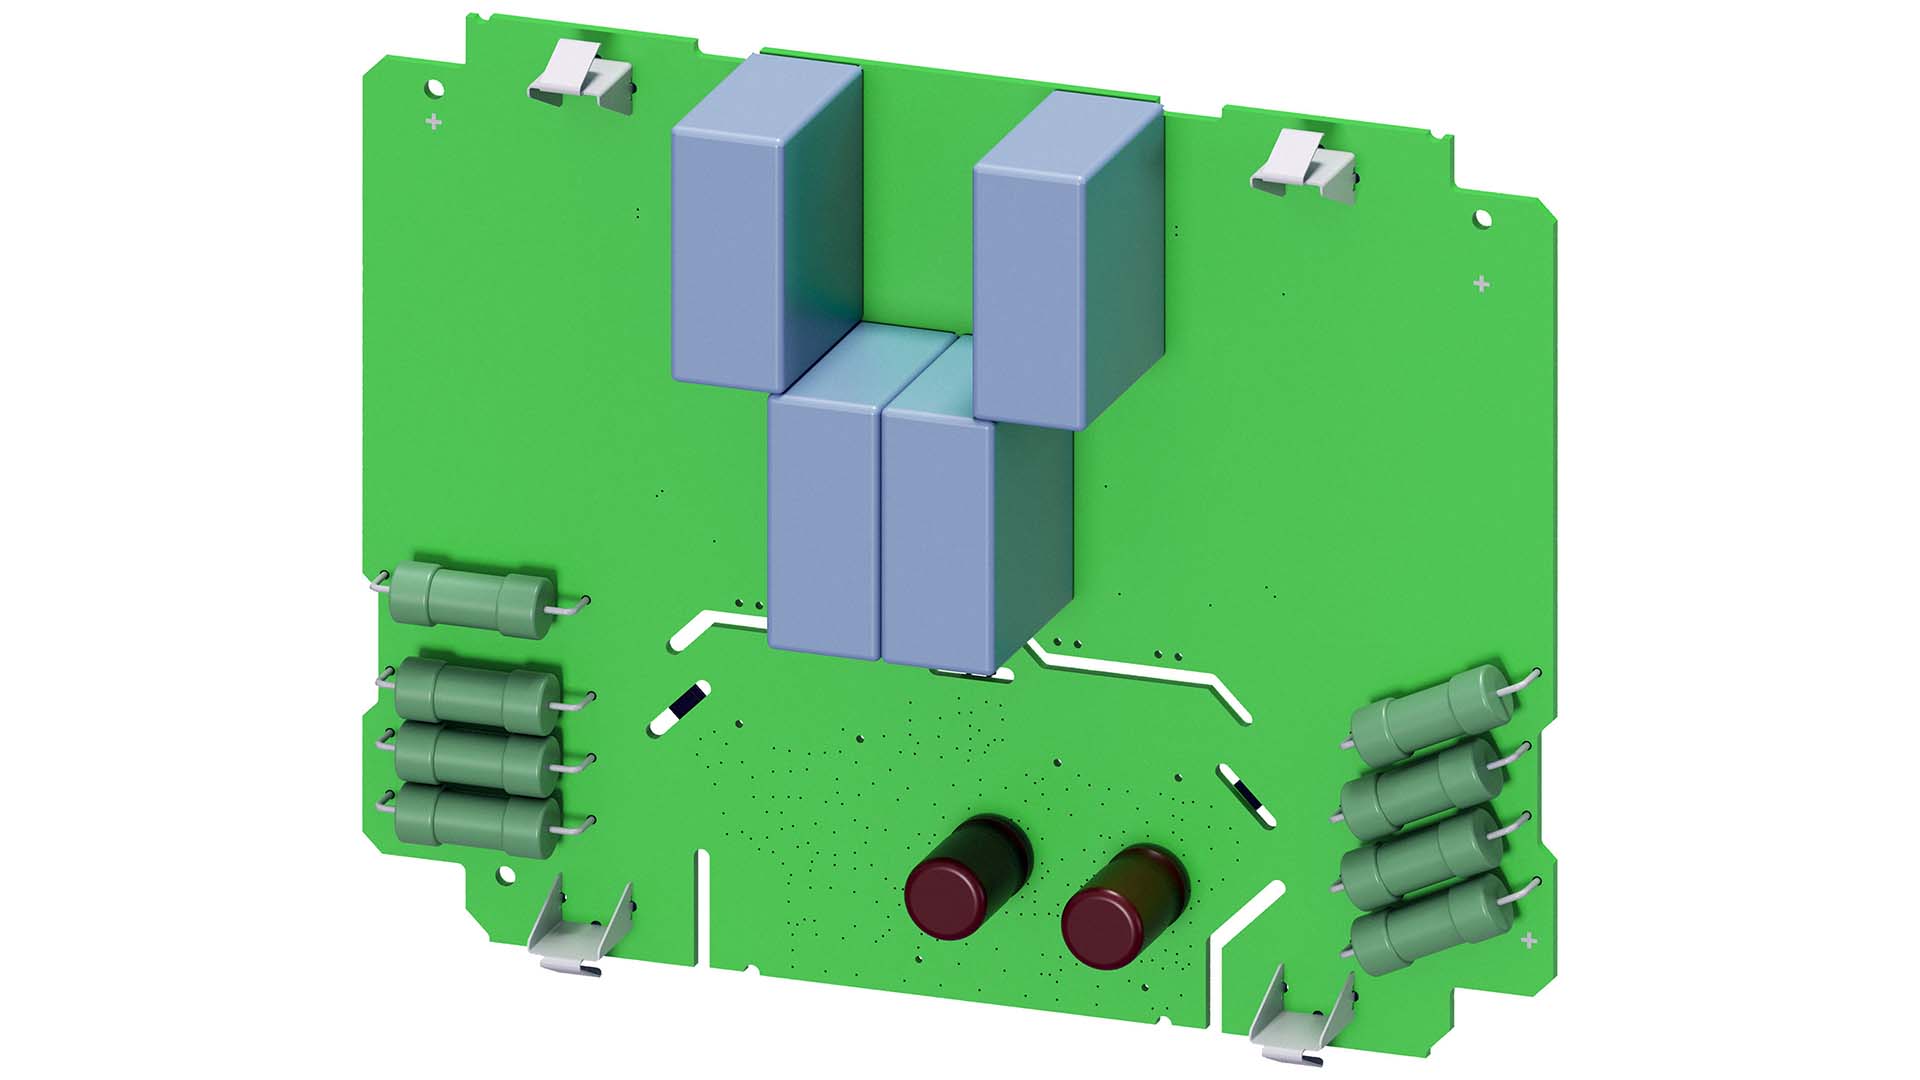 CAD rendering of a PCB